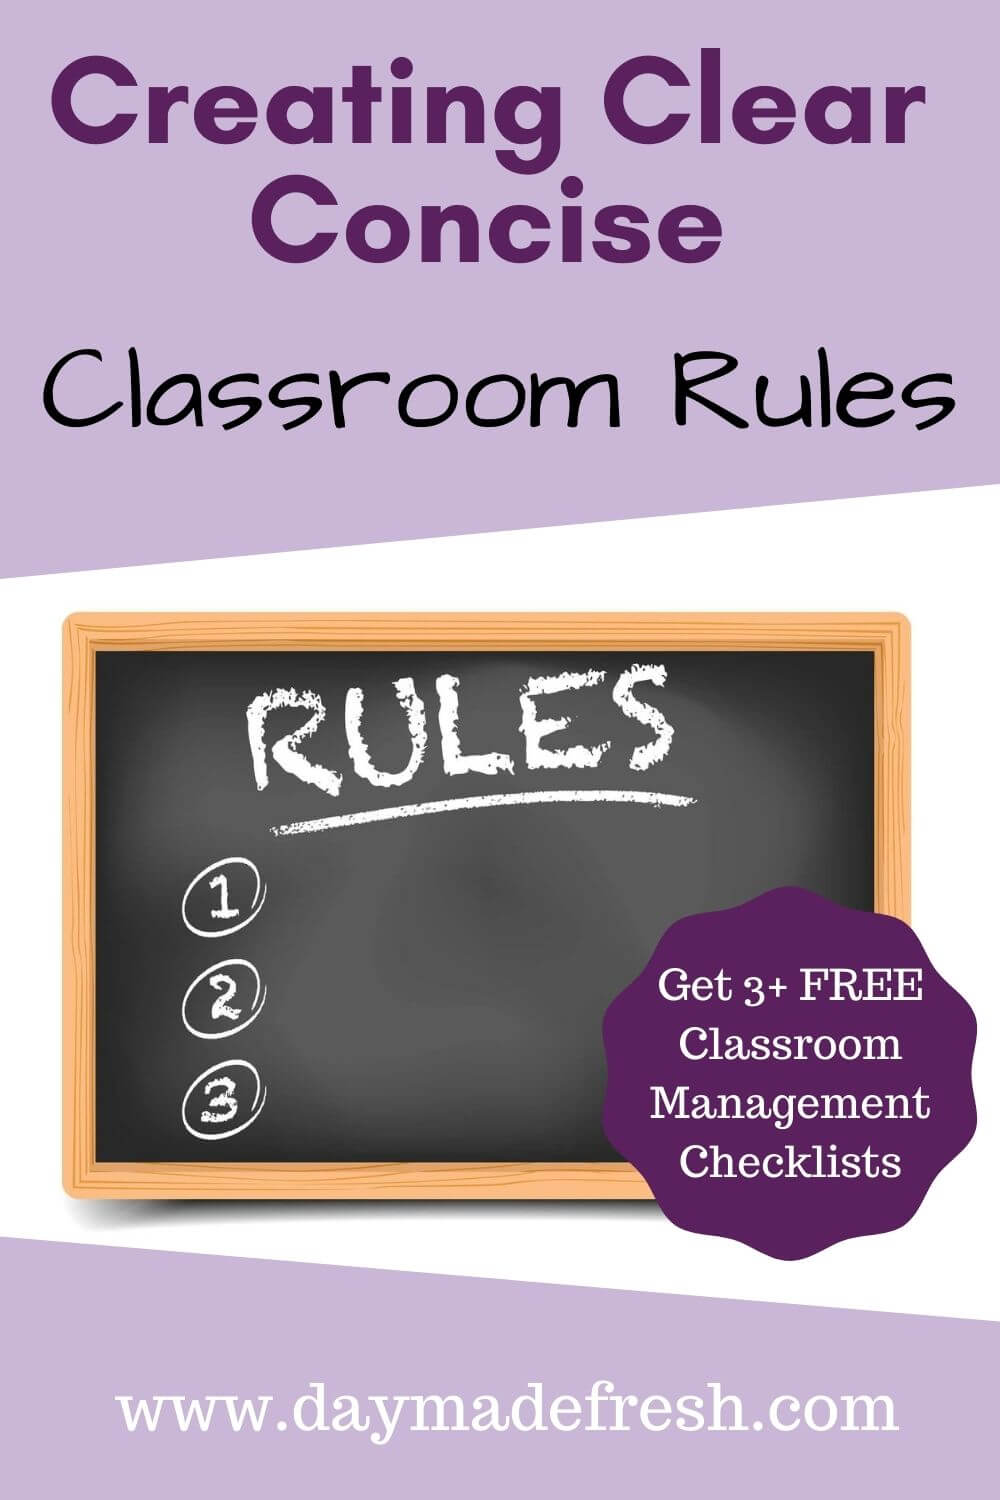 Creating Clear Concise Classroom Rules; Blackboard that says "RULES 1 2 3"